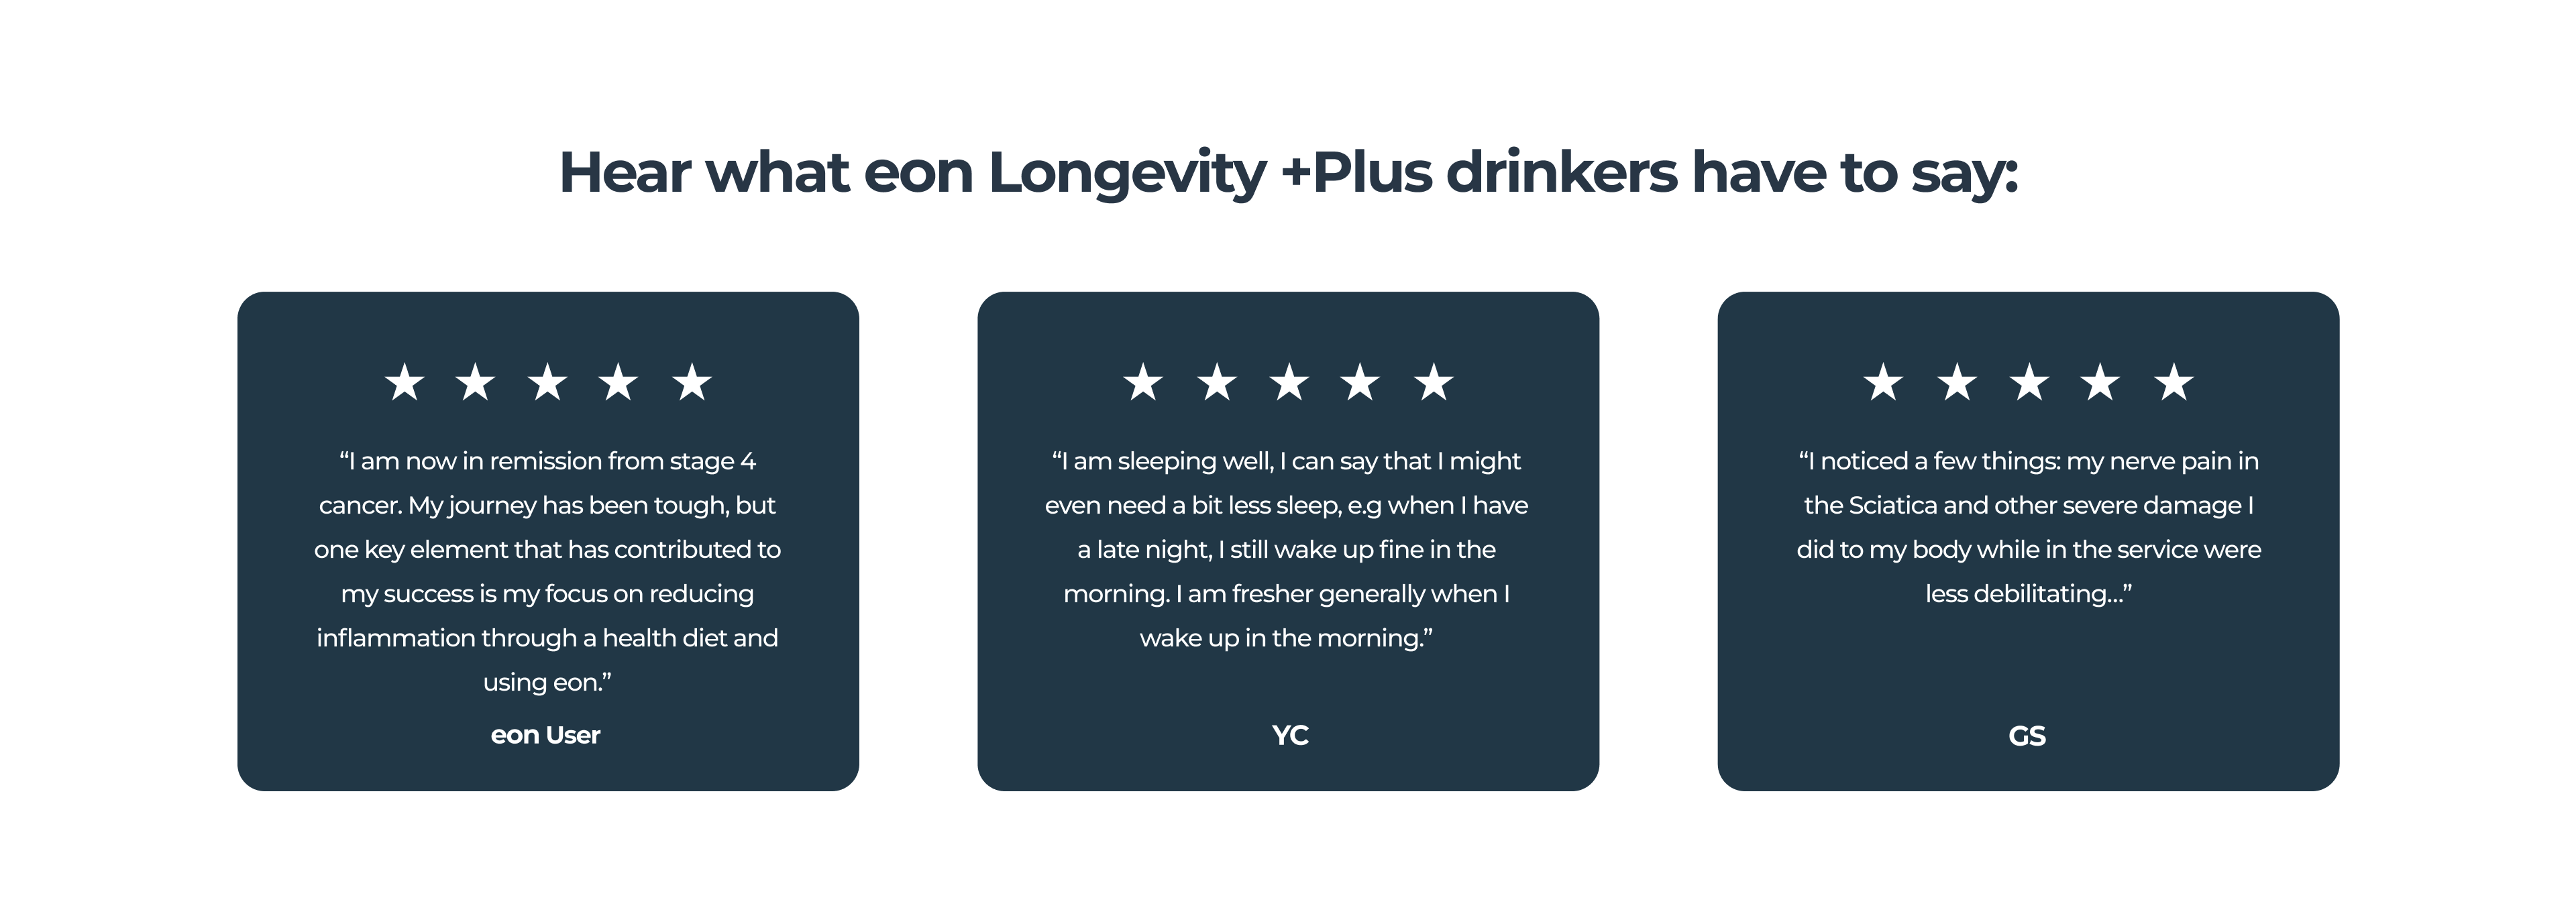 Hear what eon Longevity +Plus drinkers have to say: